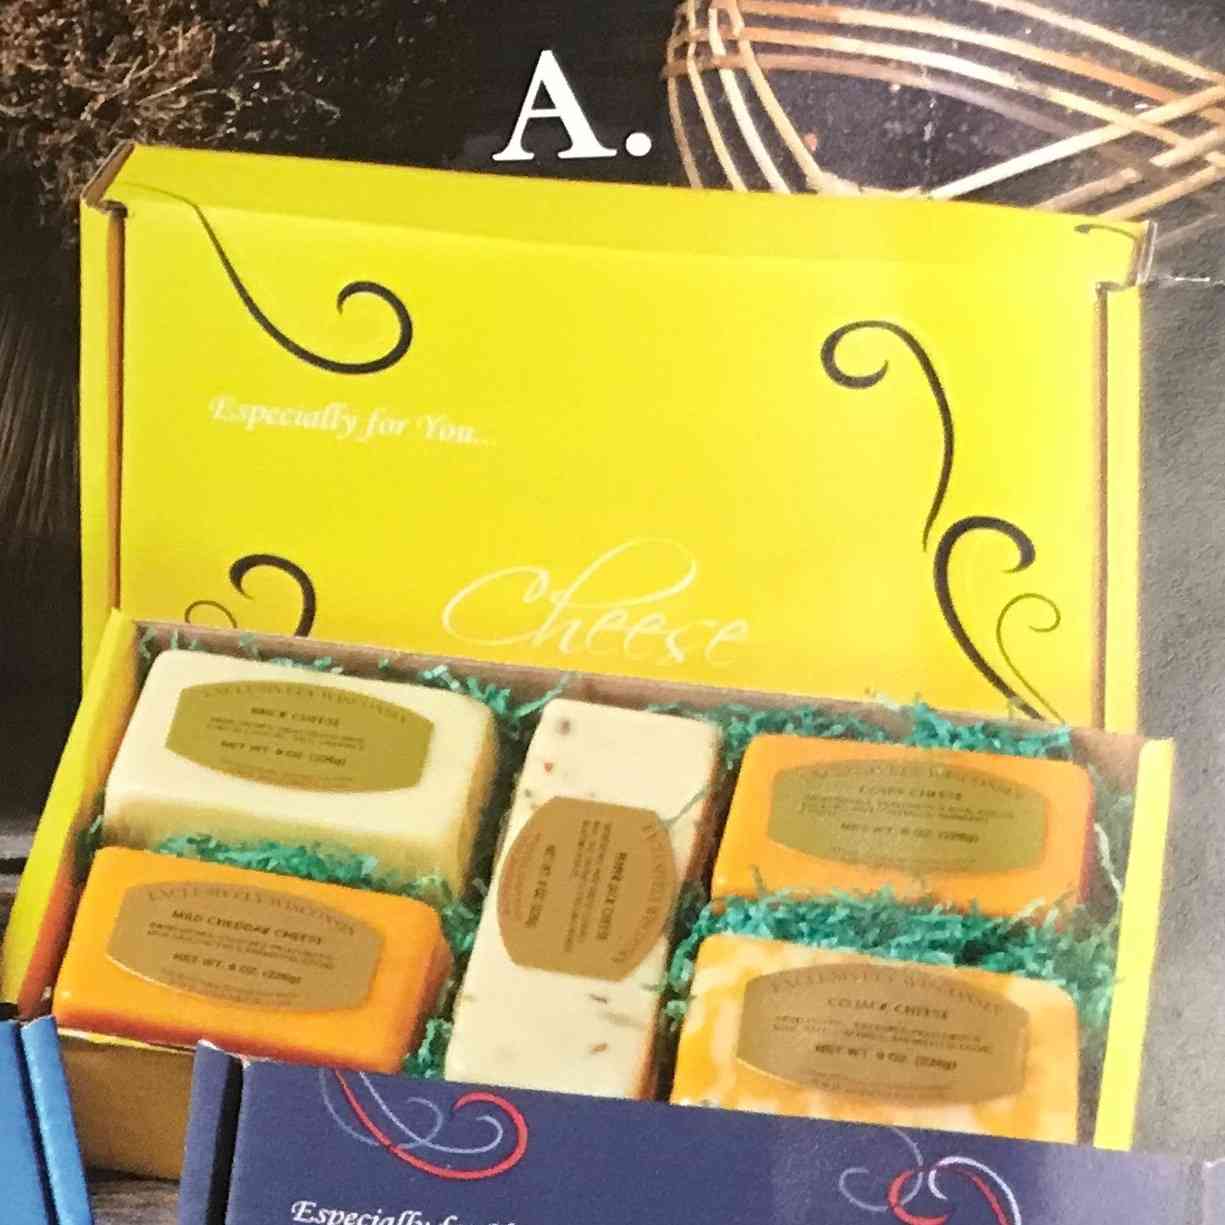 A. Cheese Lovers Delight Image